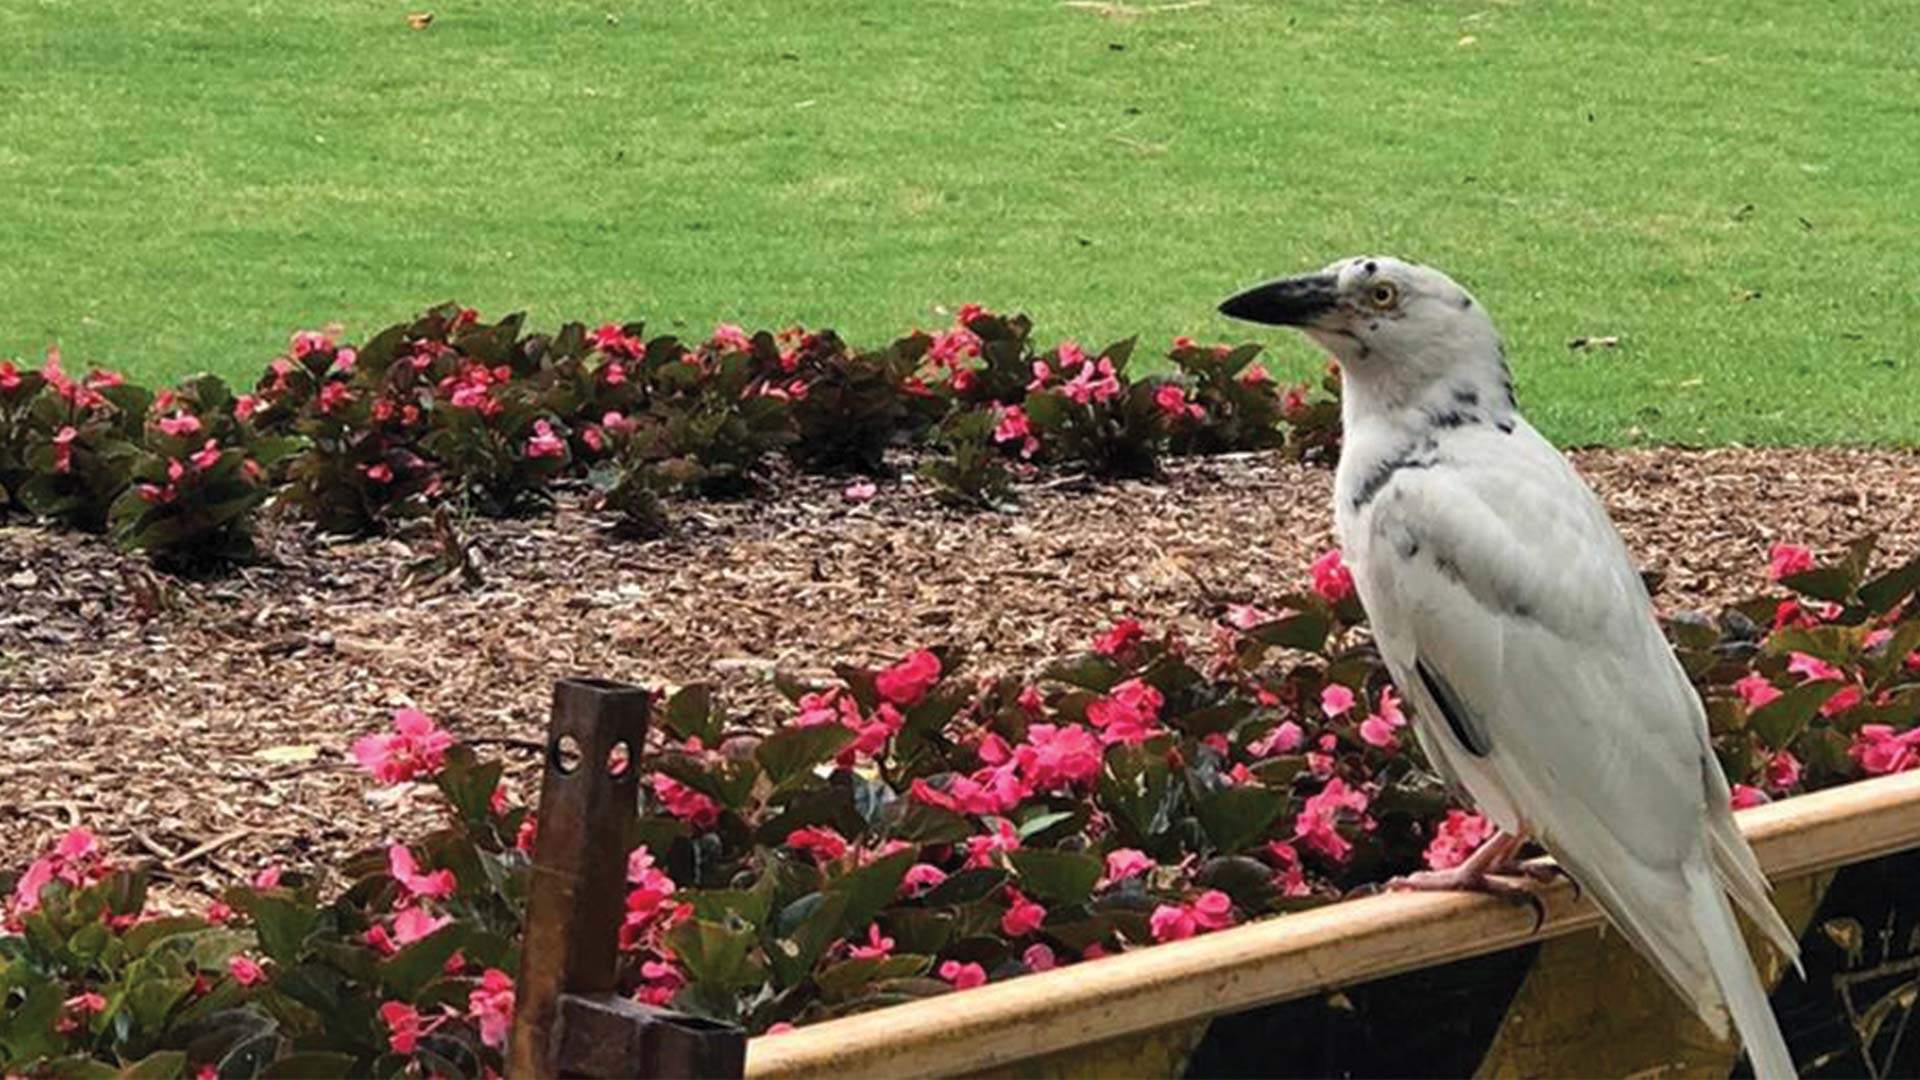 The Public's Love for This White Pied Currawong Will Give You Hope in Humanity